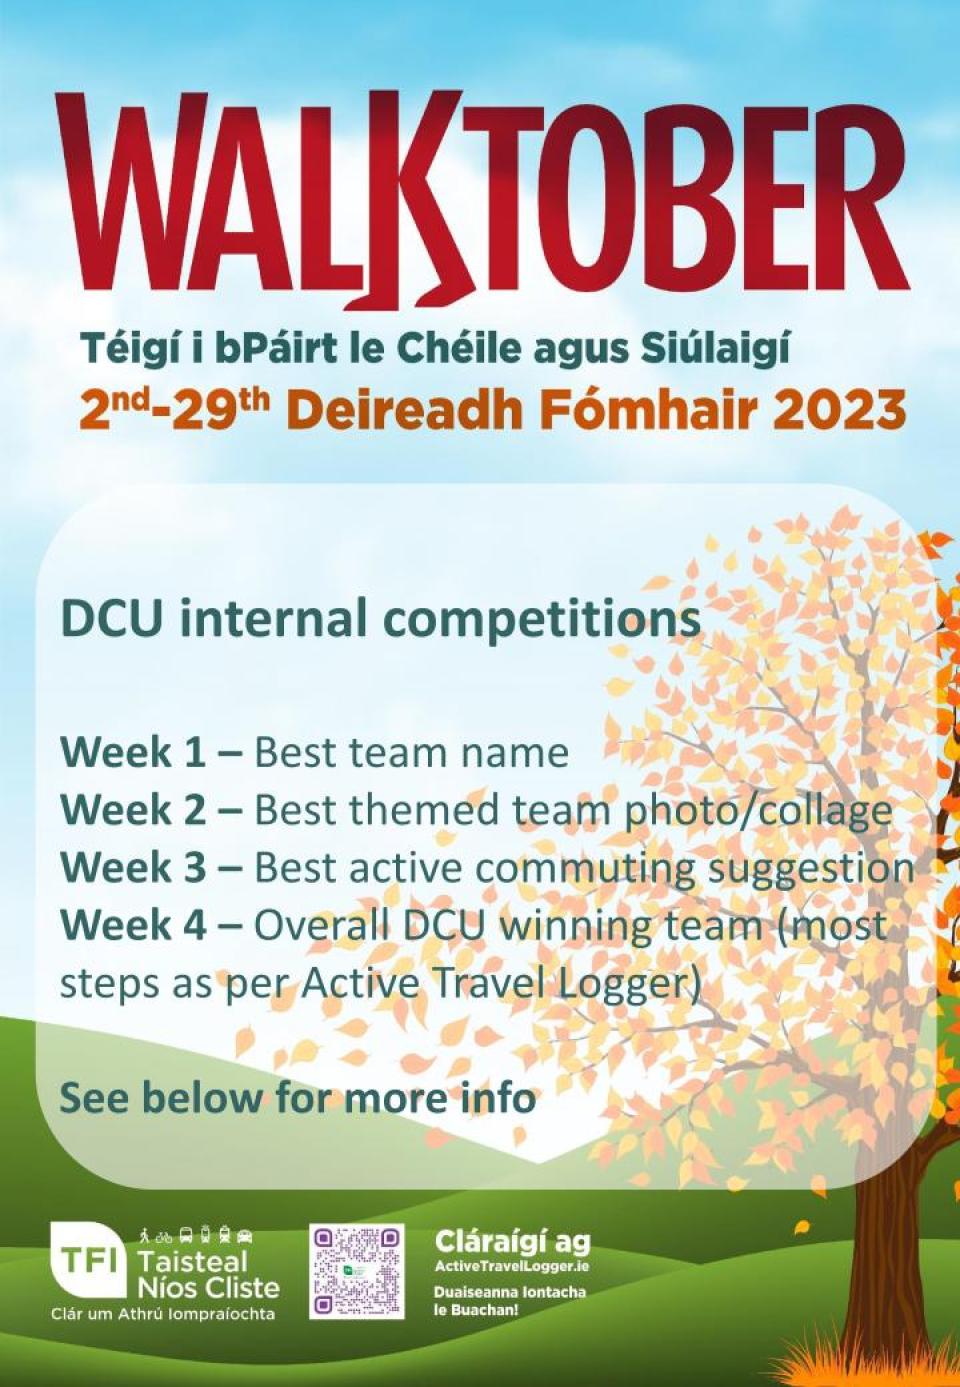 Poster outlining the DCU-run competitions for Walktober 2023 - Week 1 – Best team name Week 2 – Best themed team photo/collage Week 3 – Best active commuting suggestion Week 4 – Overall DCU winning team (most steps as per Active Travel Logger)  See below for more info